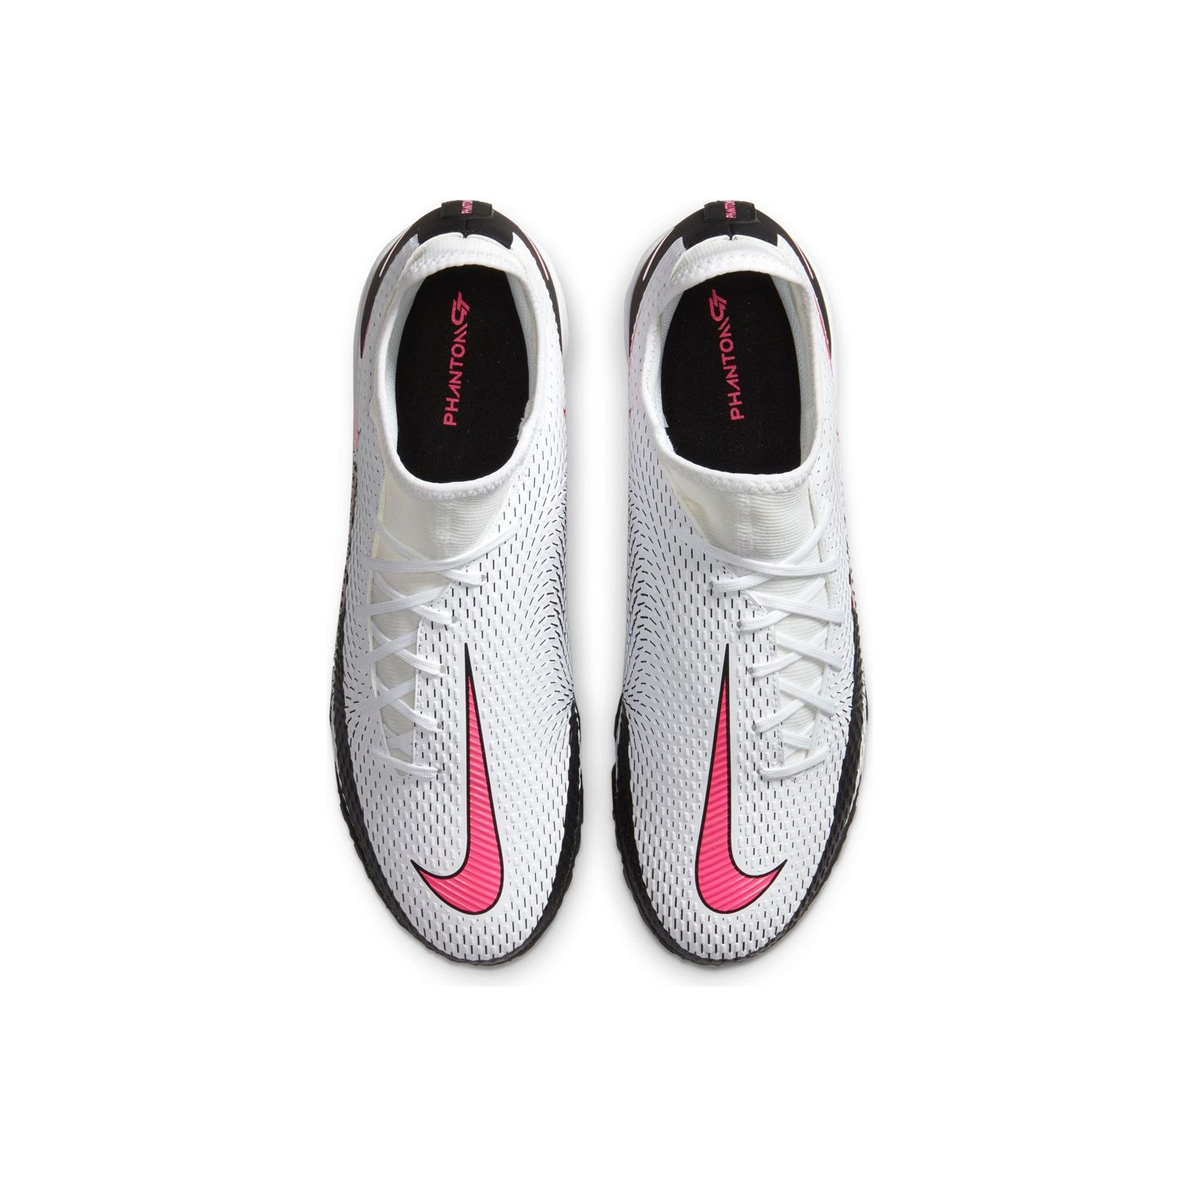 Botines Nike Phantom GT Academy Dynamic Fit TF,  image number null